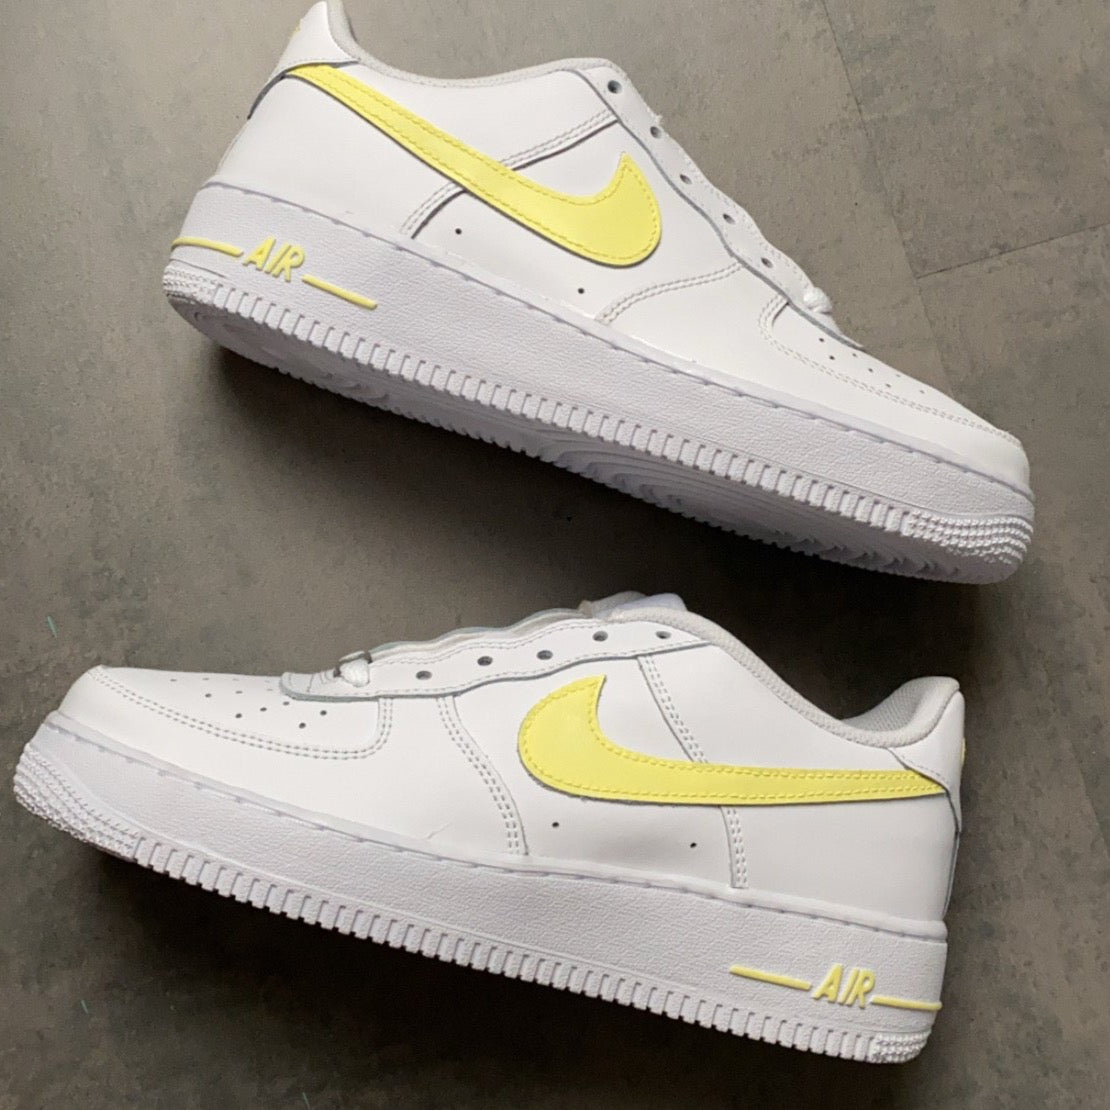 pastel yellow air force 1